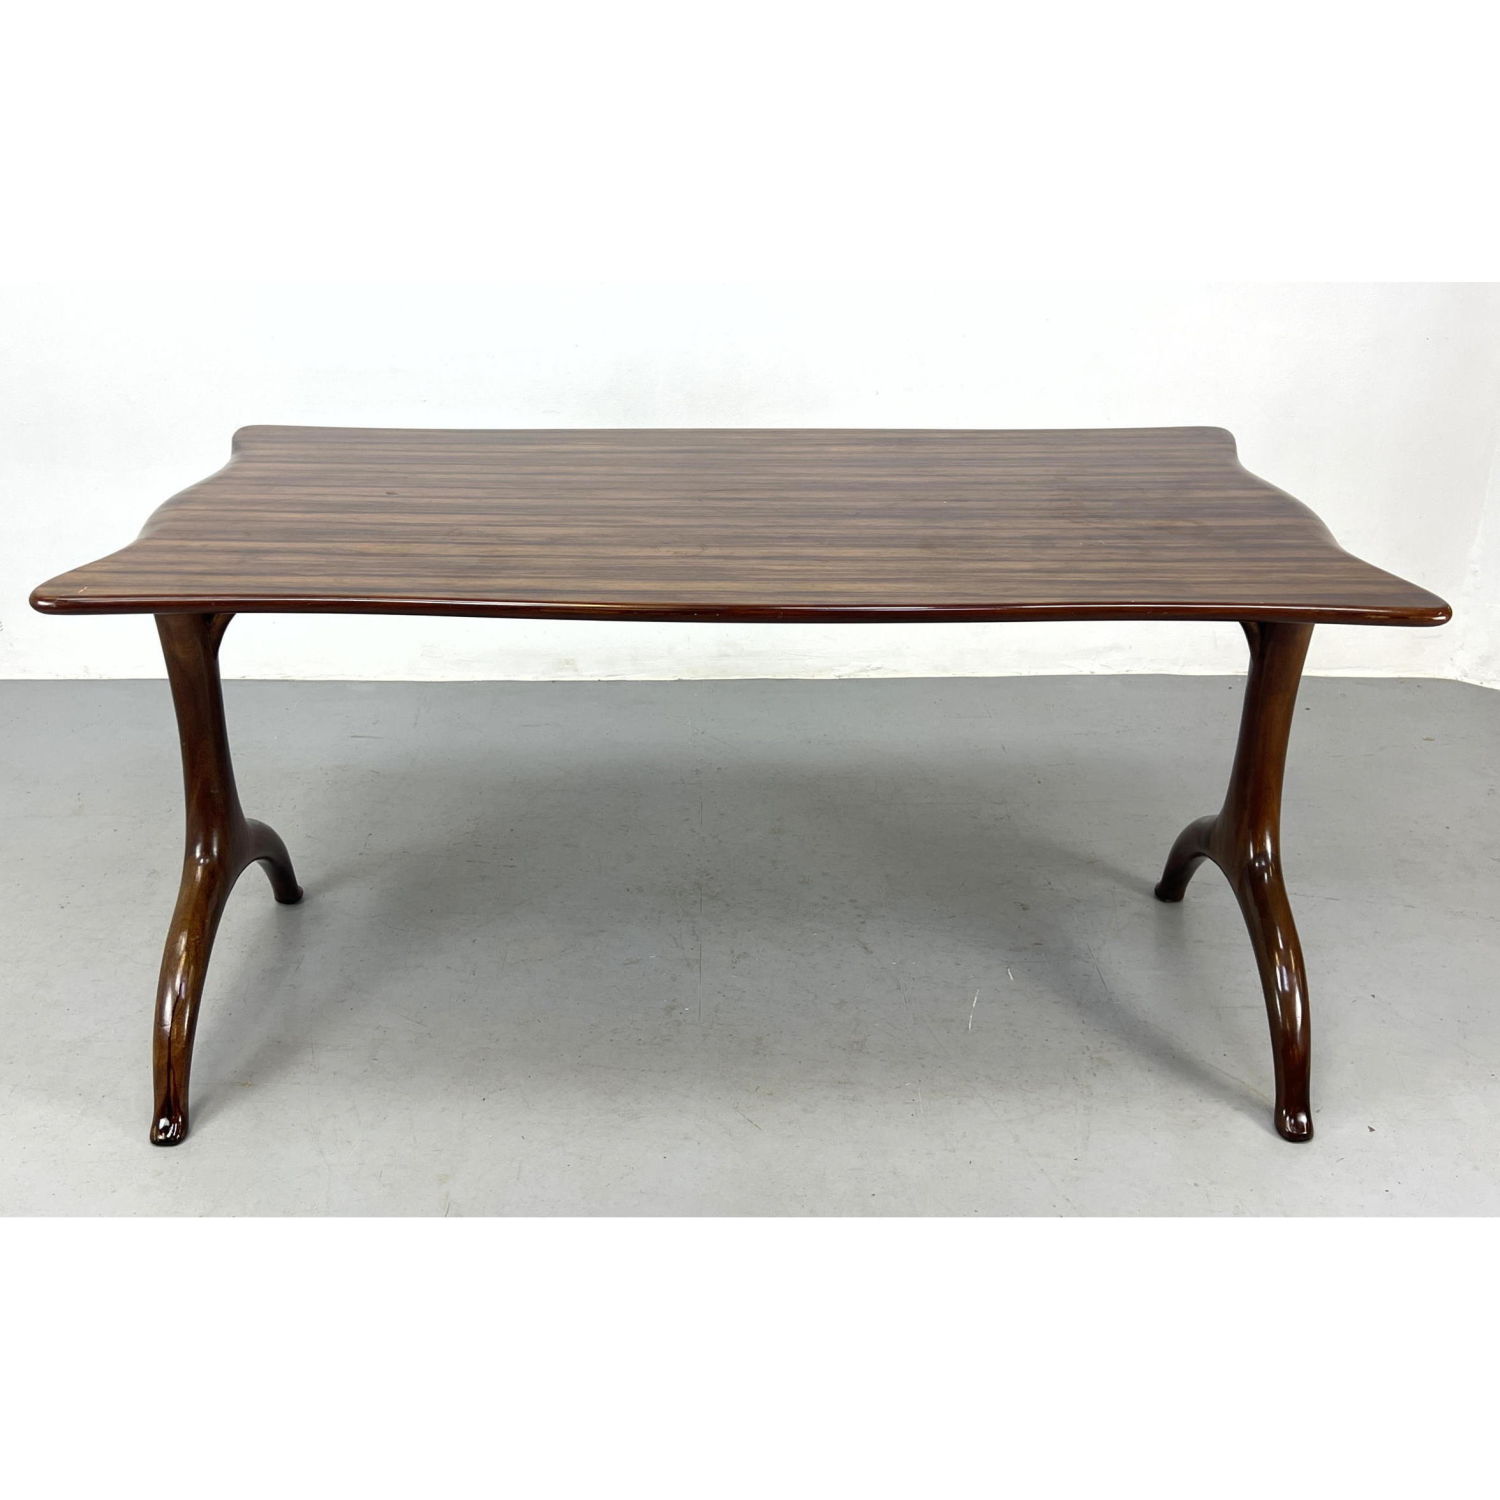 Designer Exotic Wood Dining Table  2fe32d